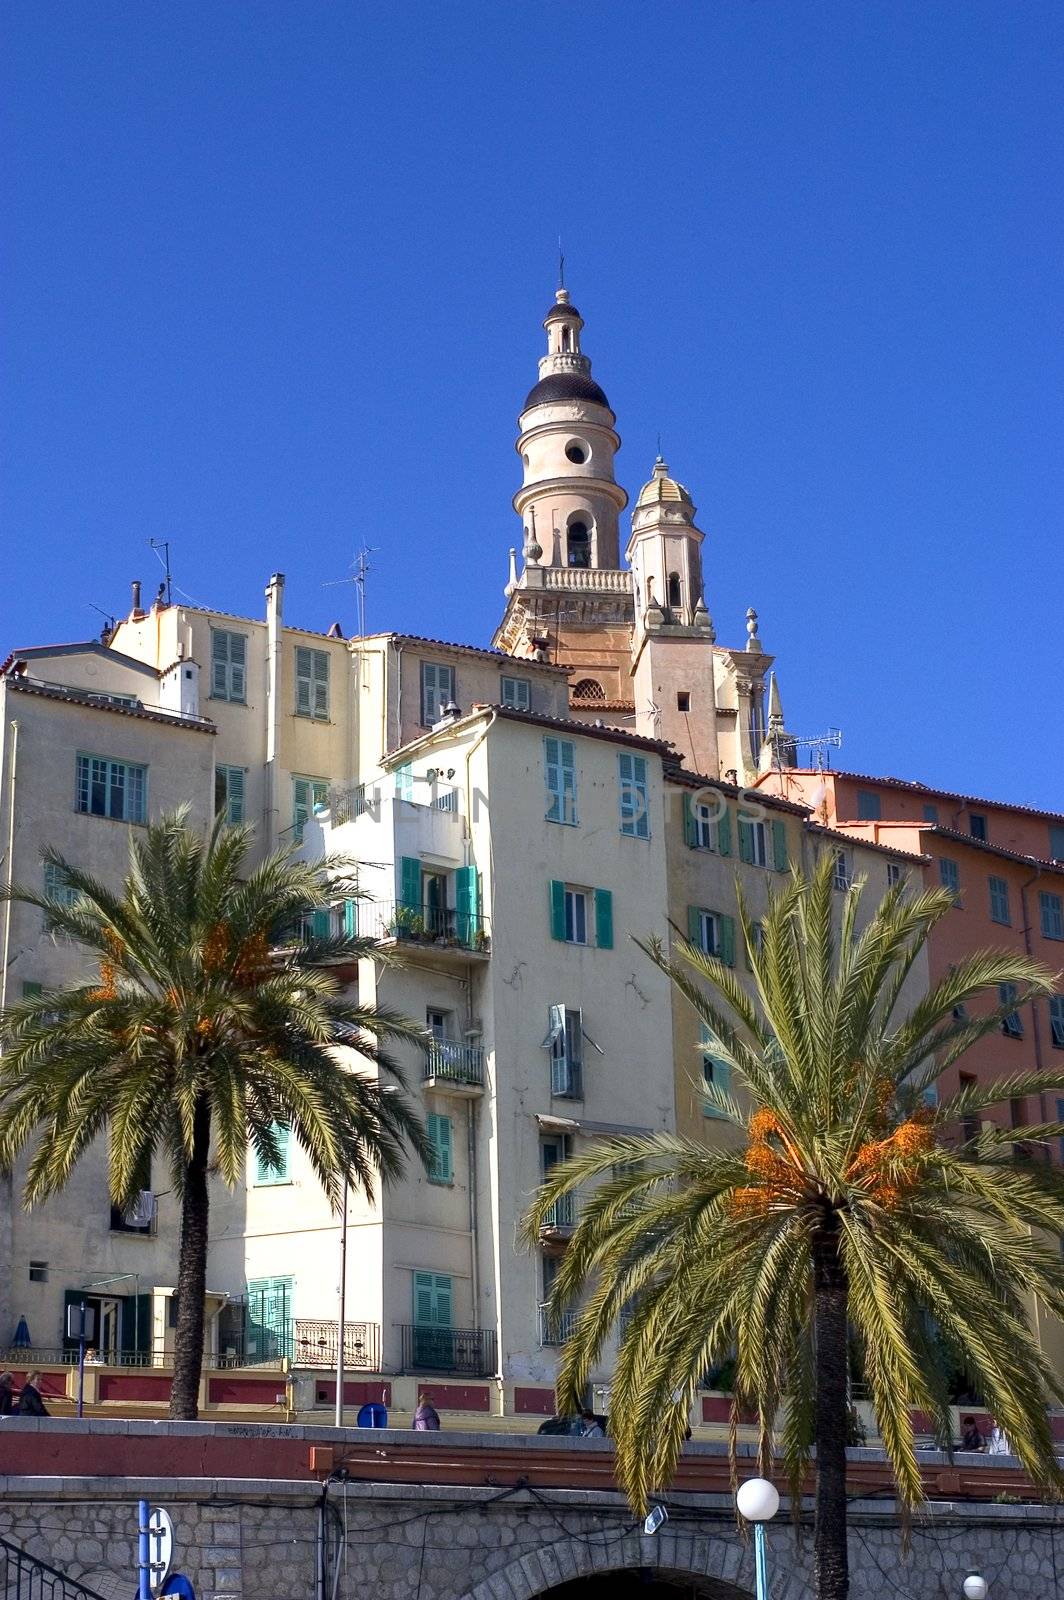 City of Menton by gillespaire